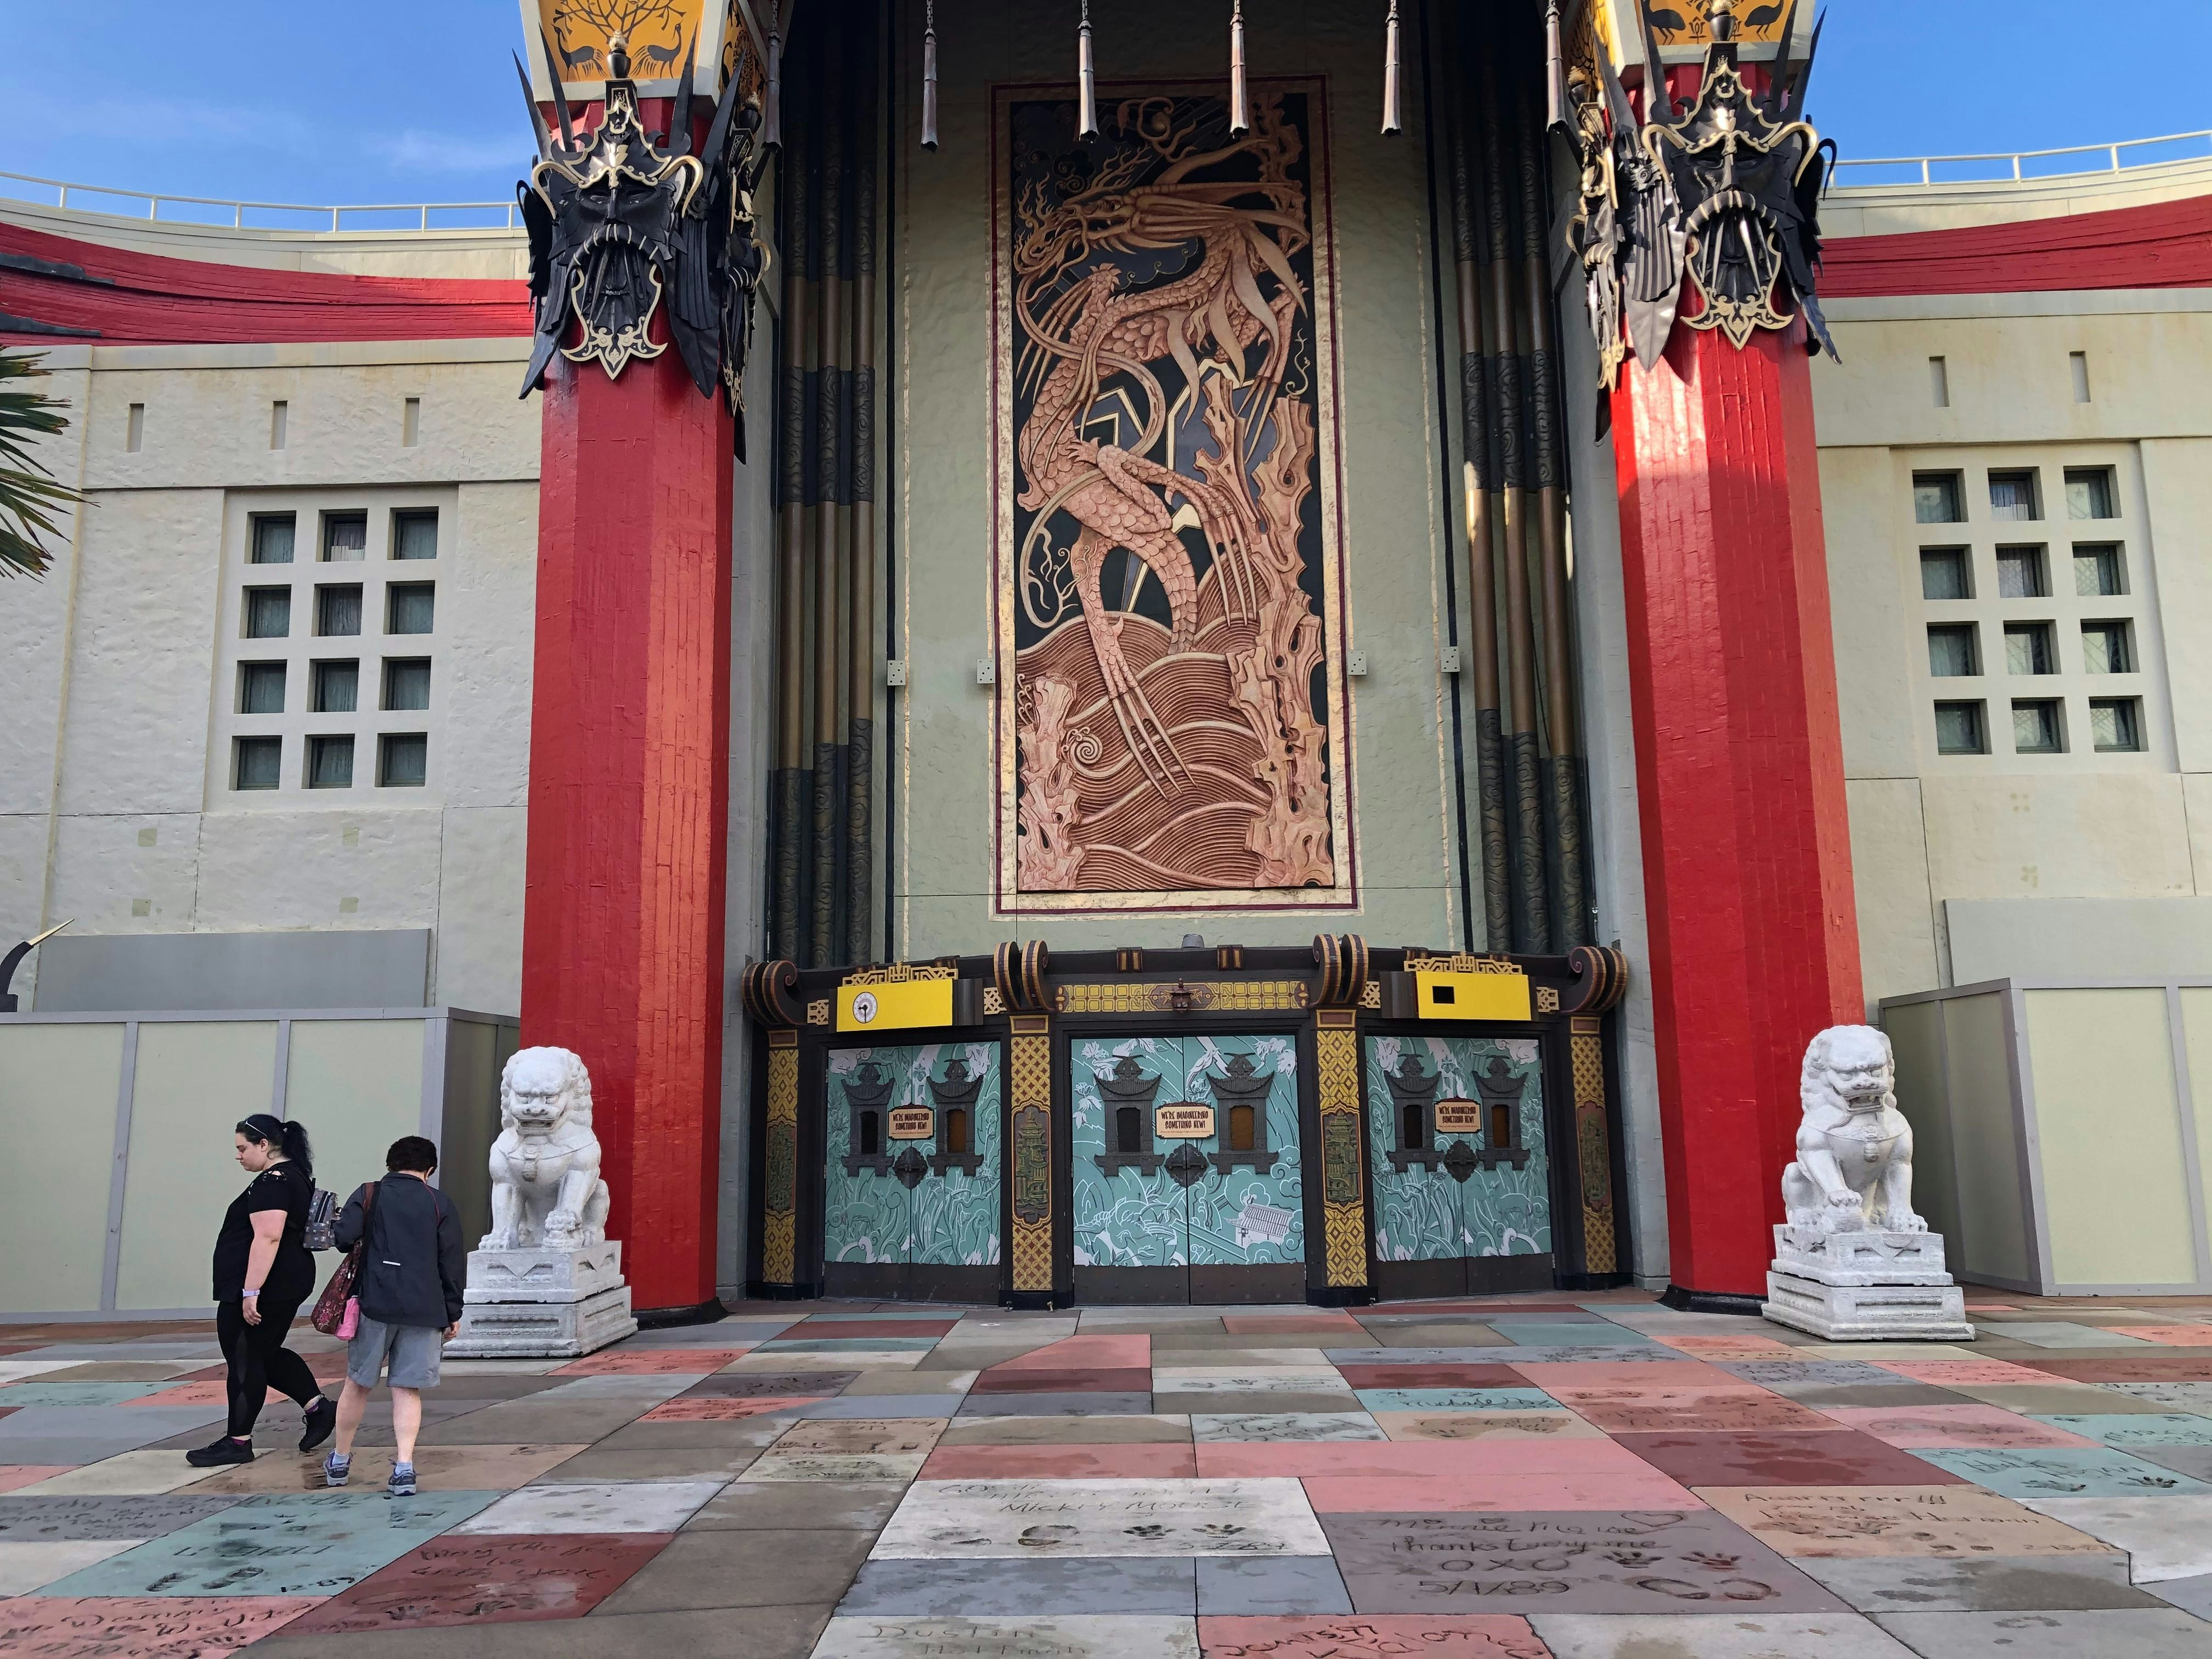 chinese theatre mickey and minnies runaway railway wait times and exit signs jan 2020 1.jpg?auto=compress%2Cformat&ixlib=php 1.2